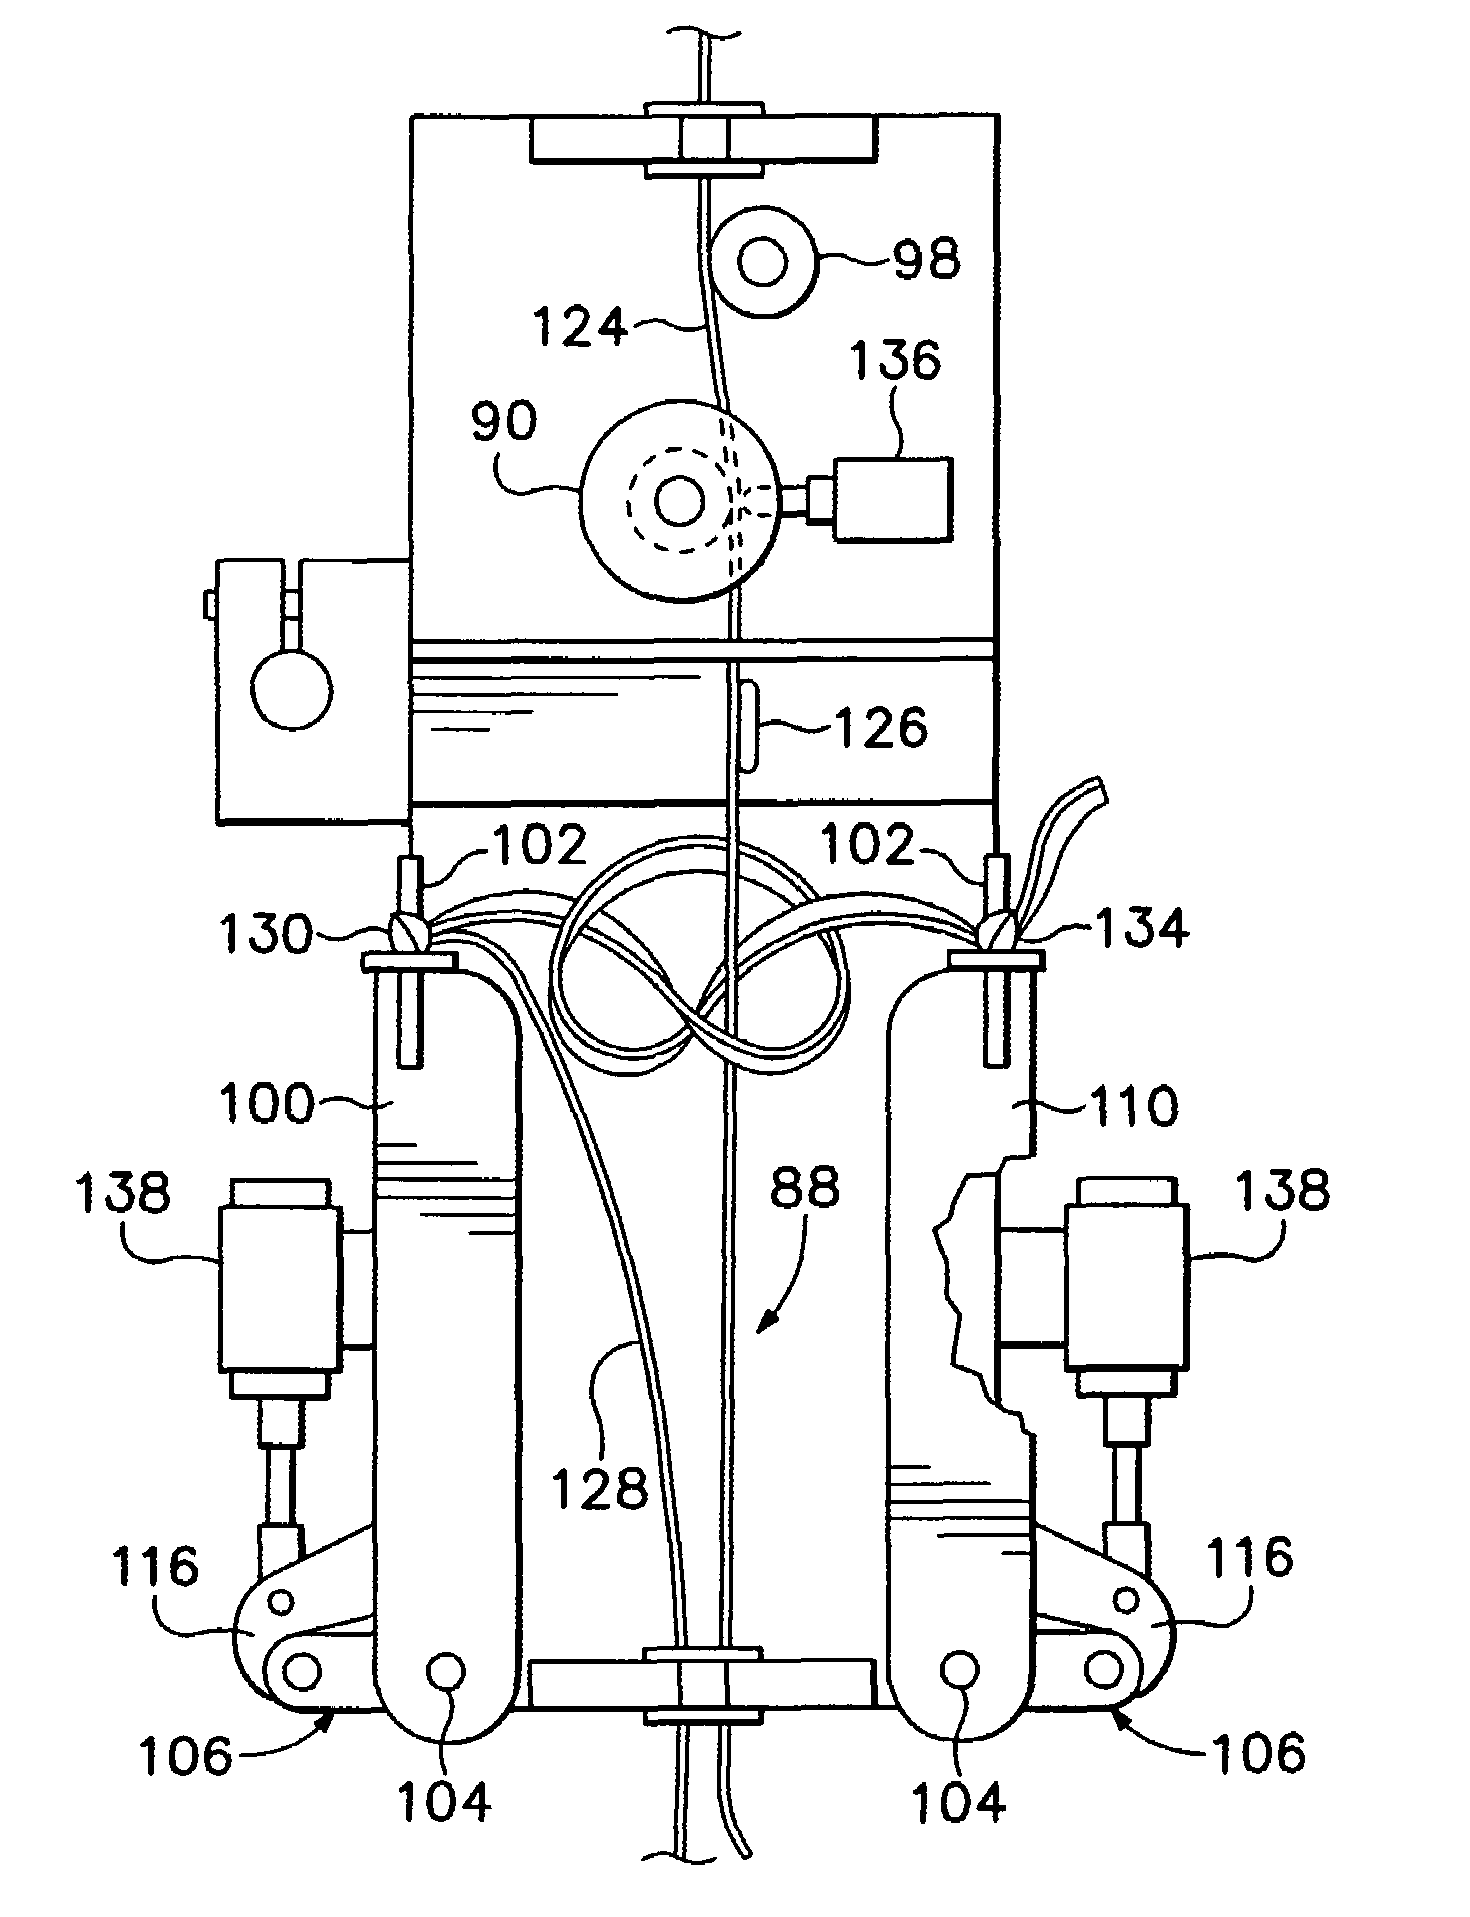 Tail for attaching the trailing edge of one roll of tape to the leading edge of another roll of tape and method of using same